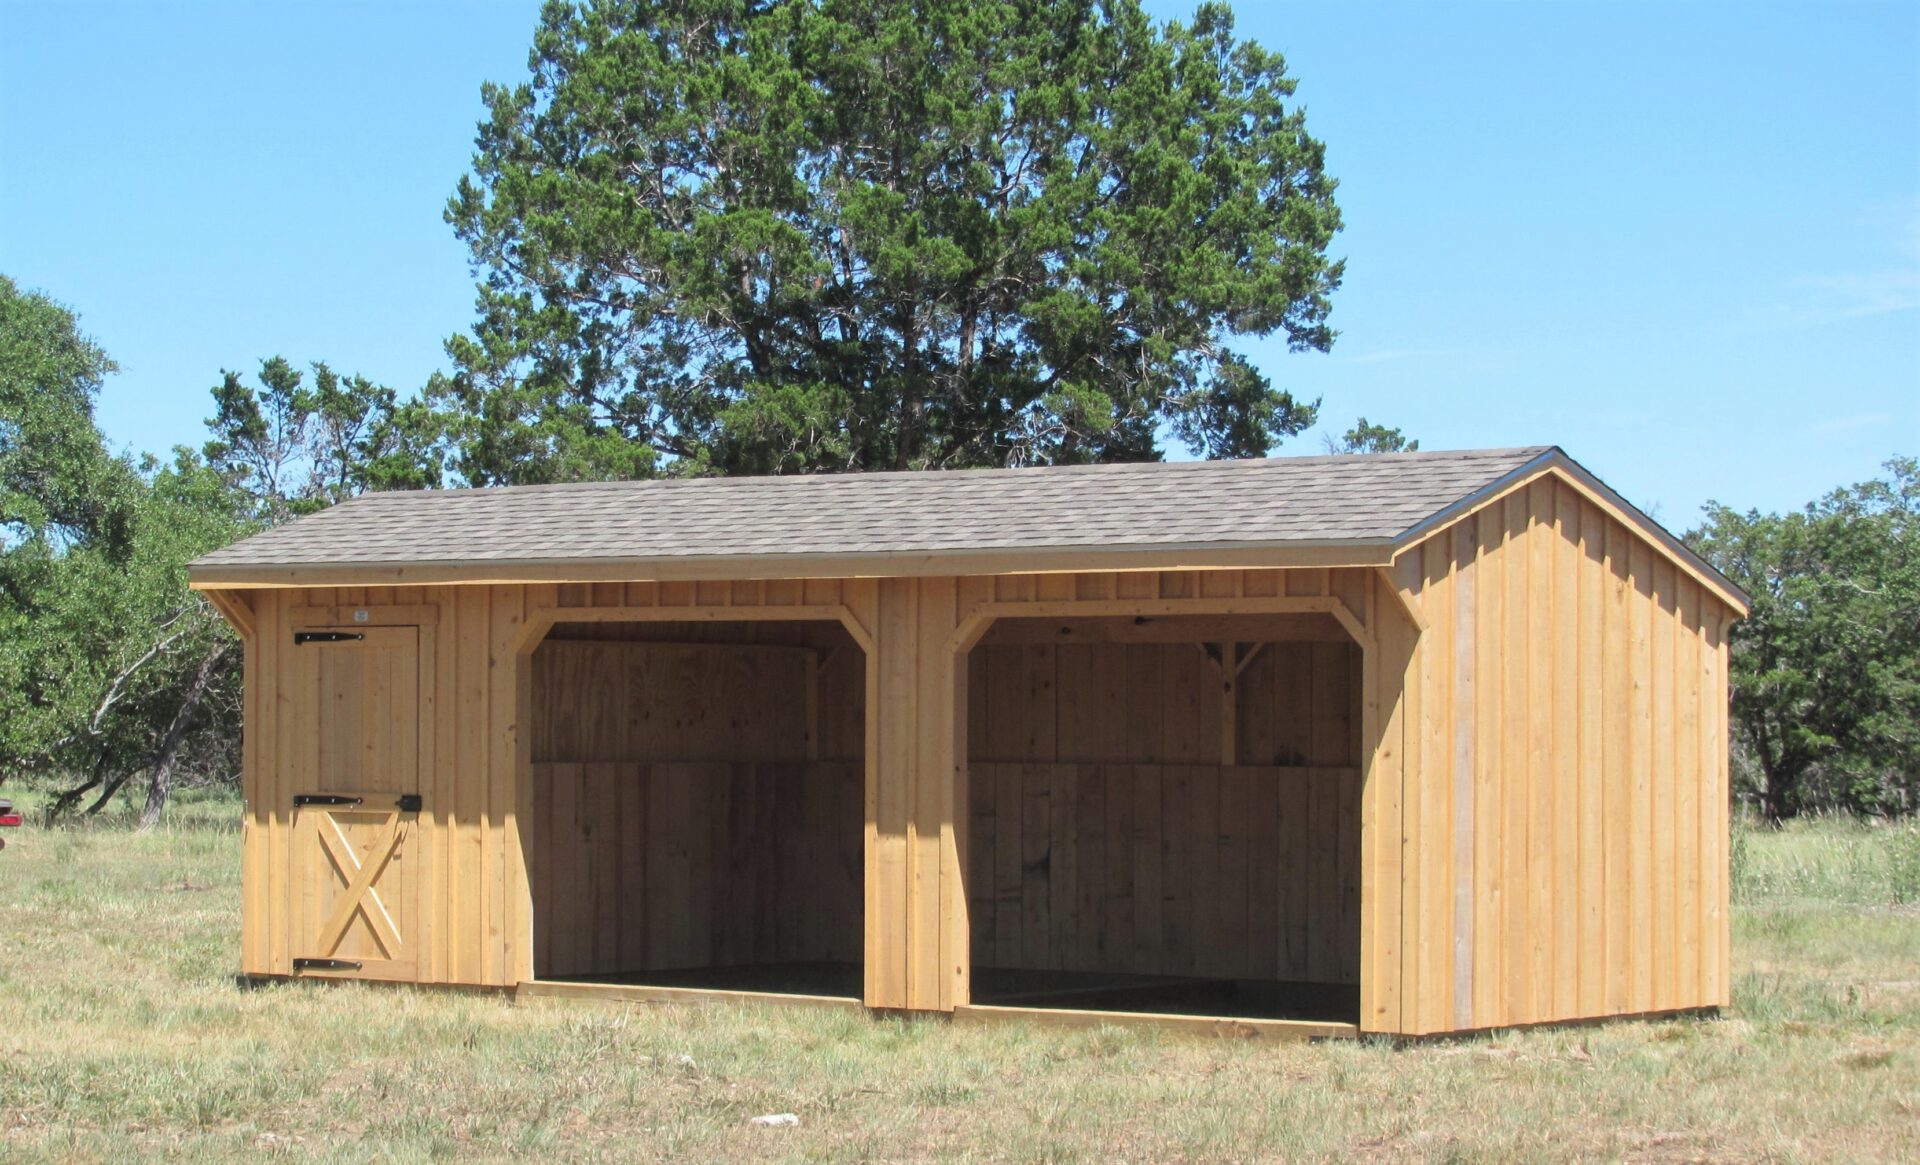 Portable Run In Shed - 10' Horse Barns For Sale | Deer Creek Structures